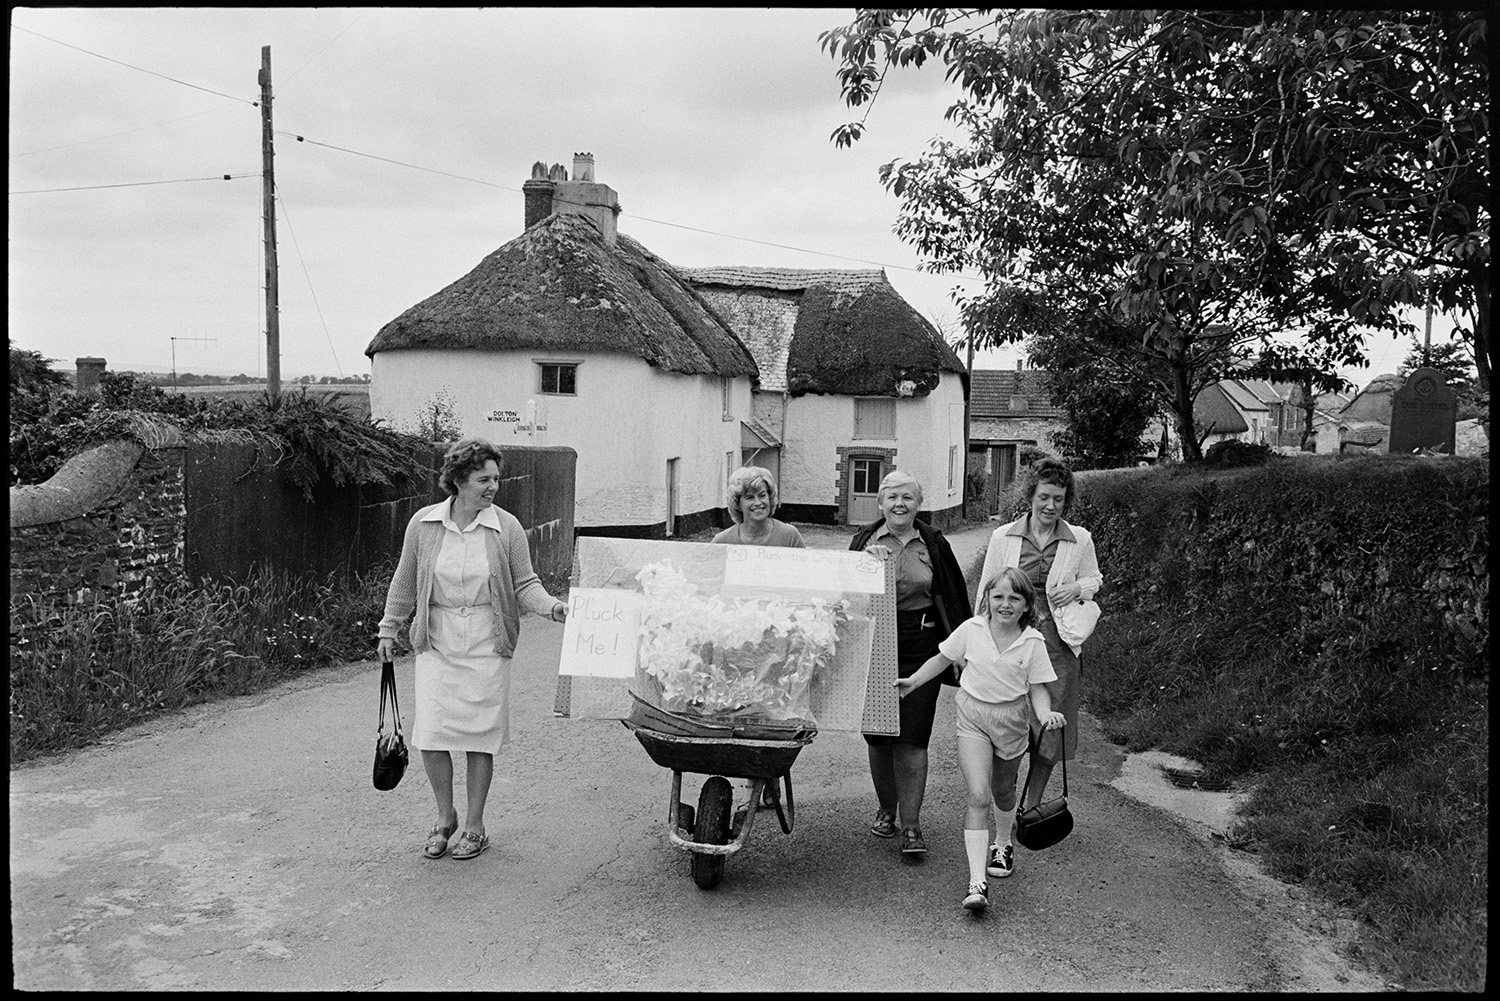 Sports, start of race, people arriving for fancy dress competition.
[Four women and a young girl walking along a road to Roborough Sports Day. They are pushing a wheelbarrow with a game titled 'pluck me' with a model chicken. Part of the churchyard and a thatched farmhouse can be seen in the background.]